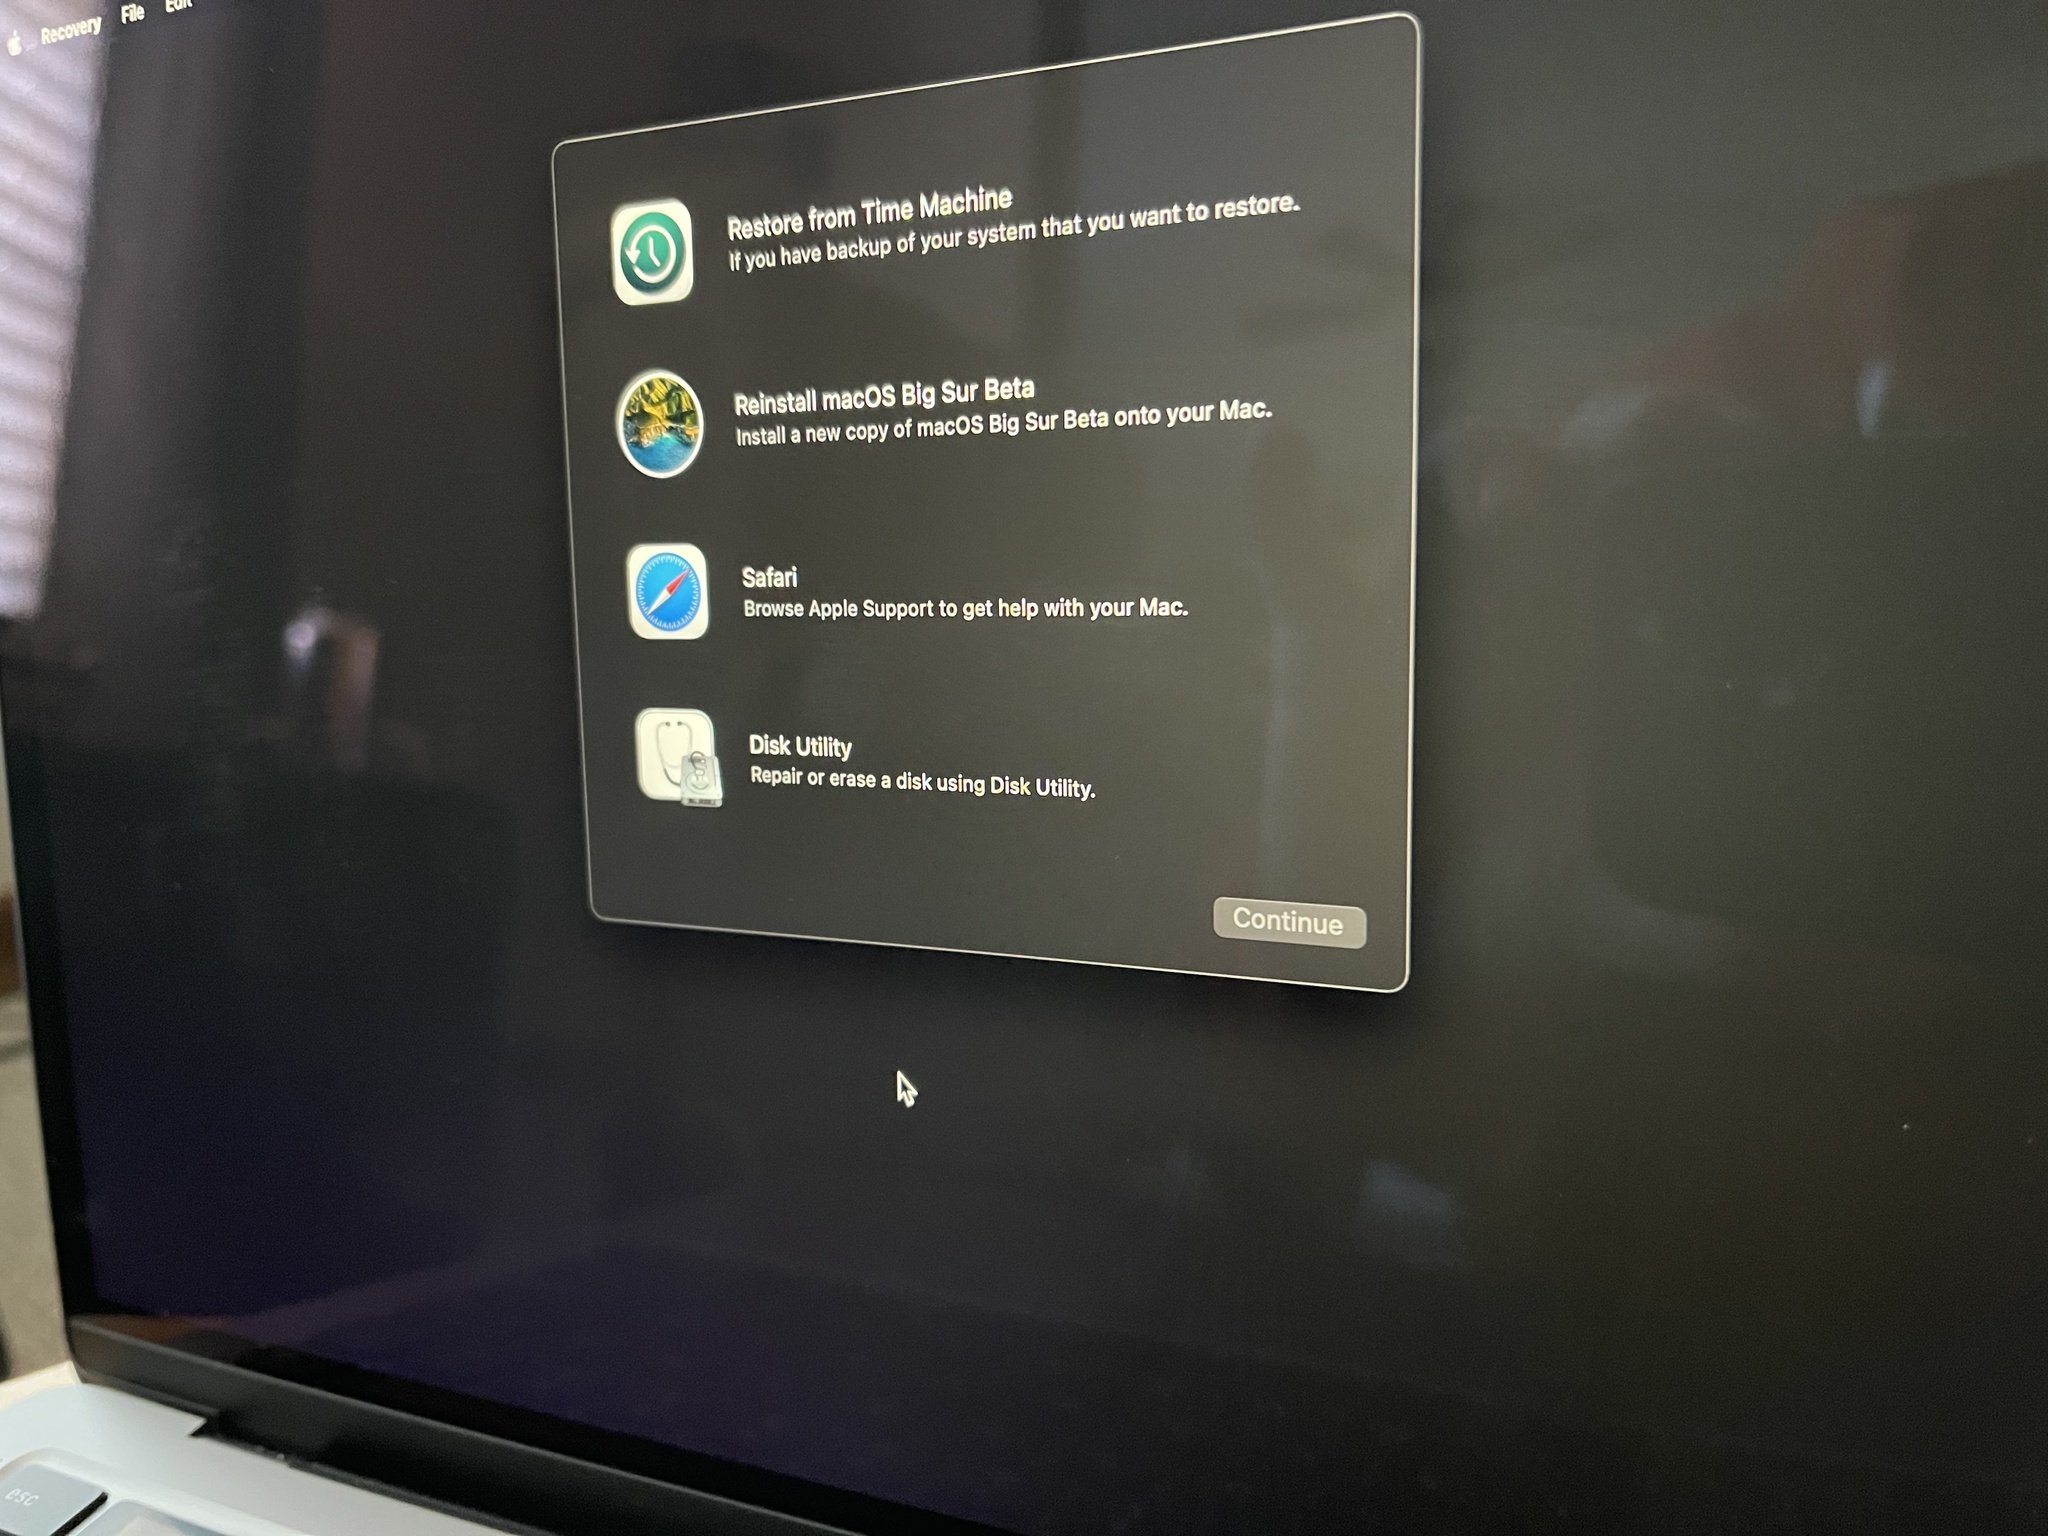 To restore your Mac to factory settings, select Reinstall macOS.